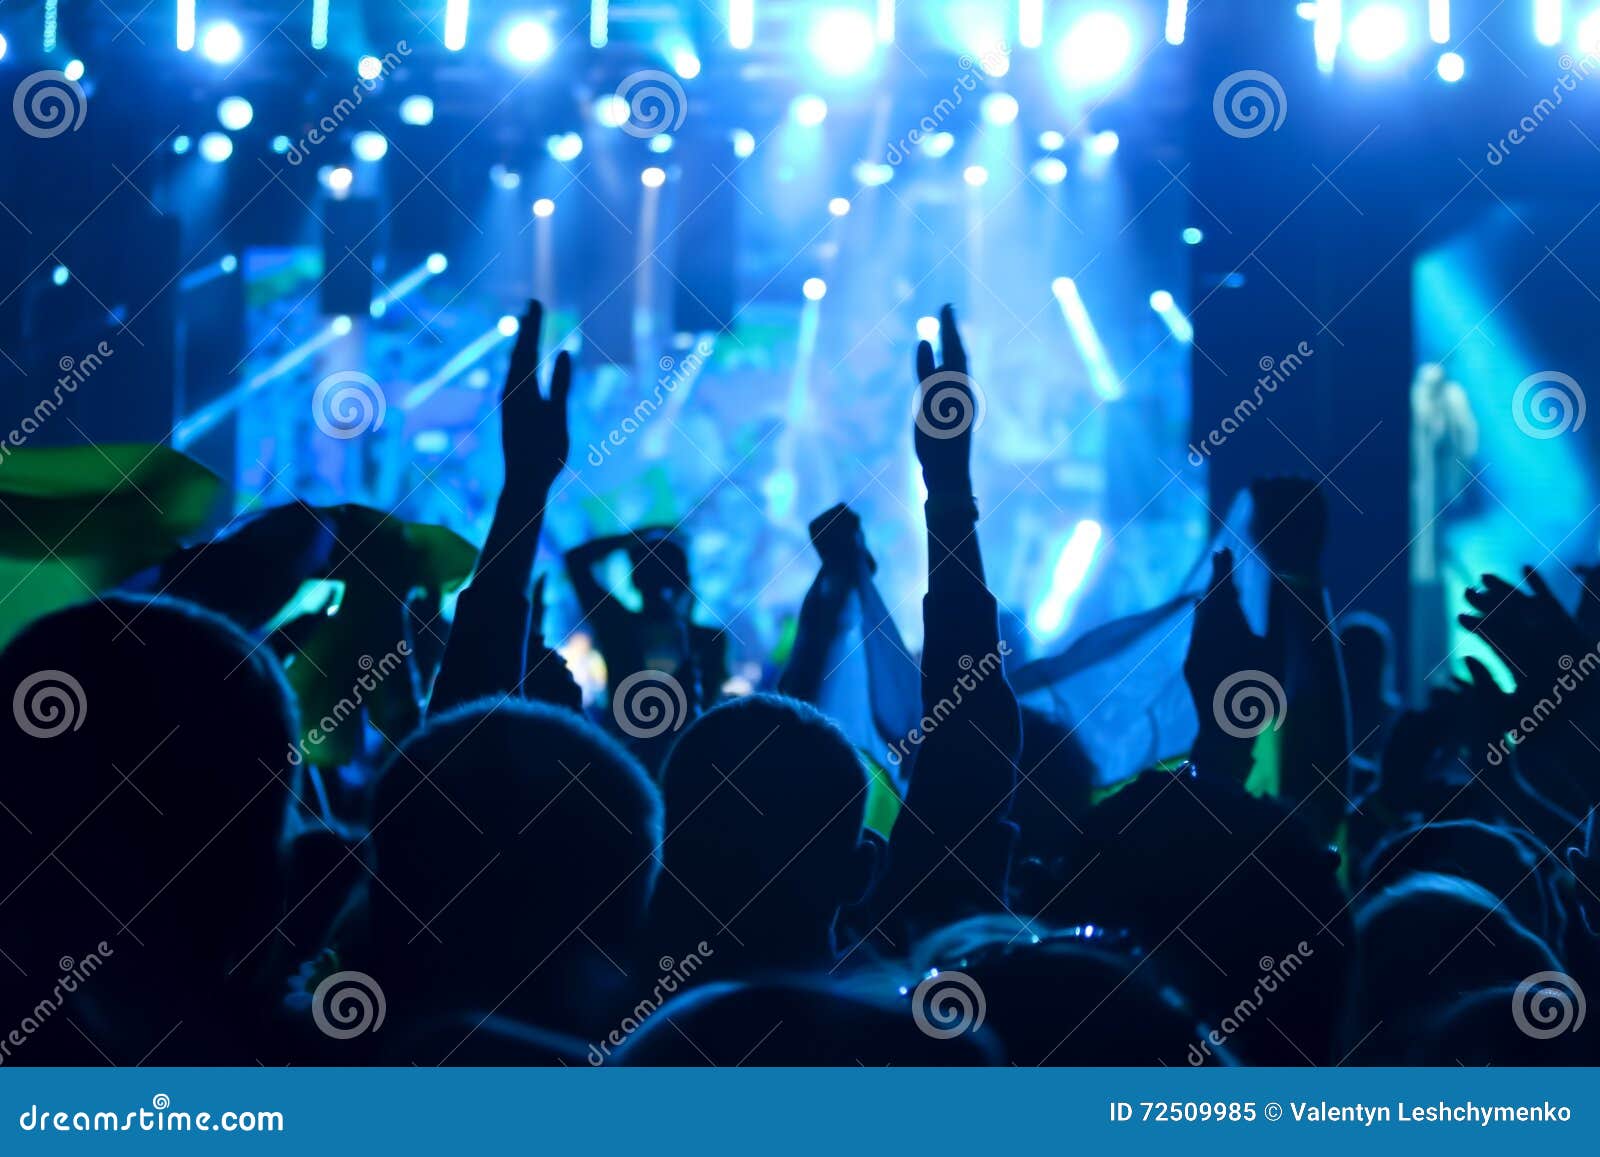 Silhouettes of Human Heads and Hands at a Rock Concert Stock Image ...